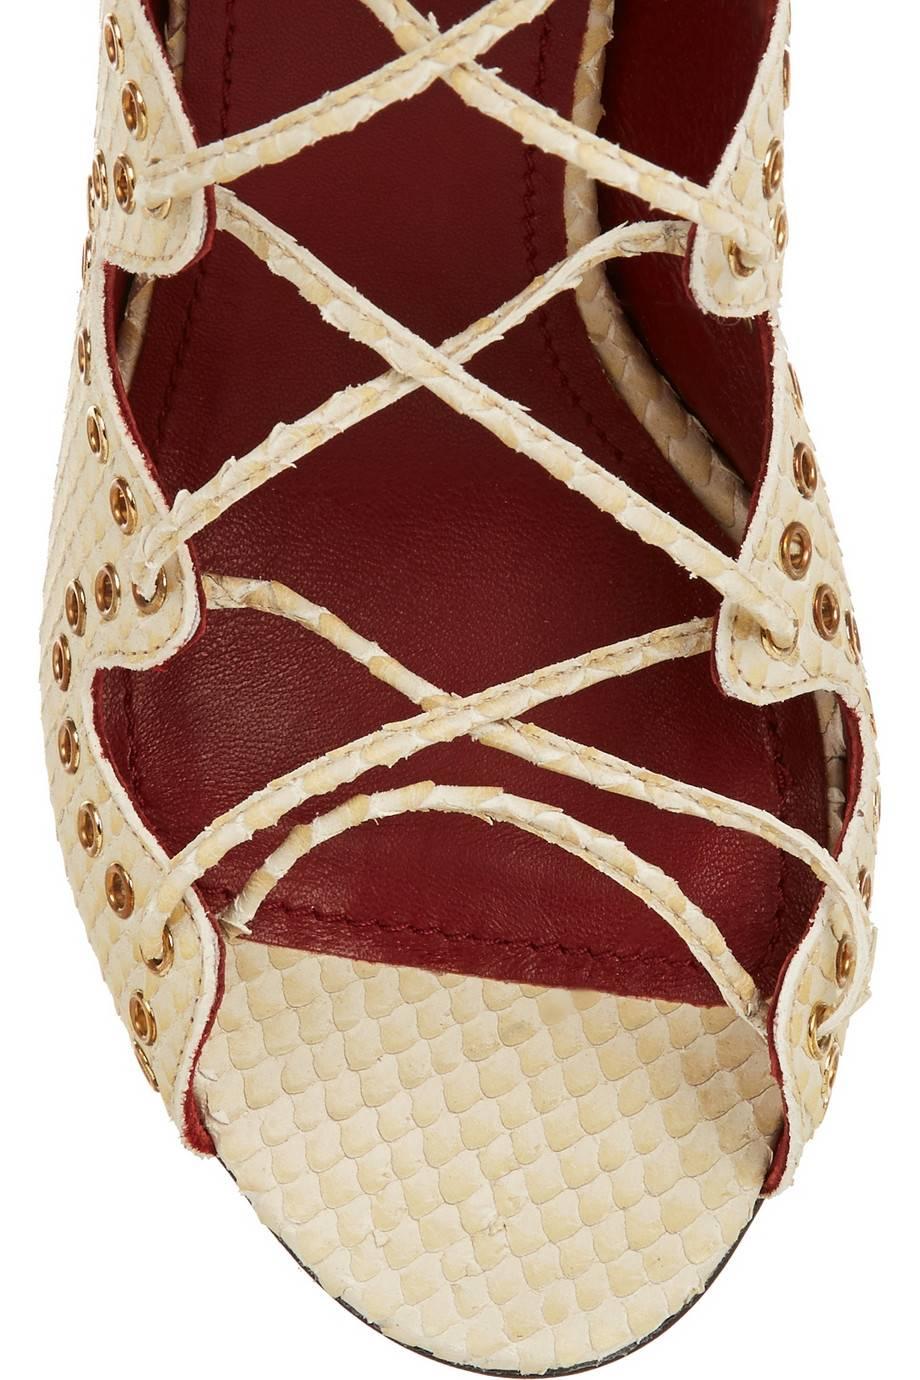 Just in time for spring: Dreamy creamy brand NEW Isabel Marant snakeskin print cream leather tie up sandals. 

Size FR 37 (US 6)
Leather
Zipper back and tie closures
Heel 4